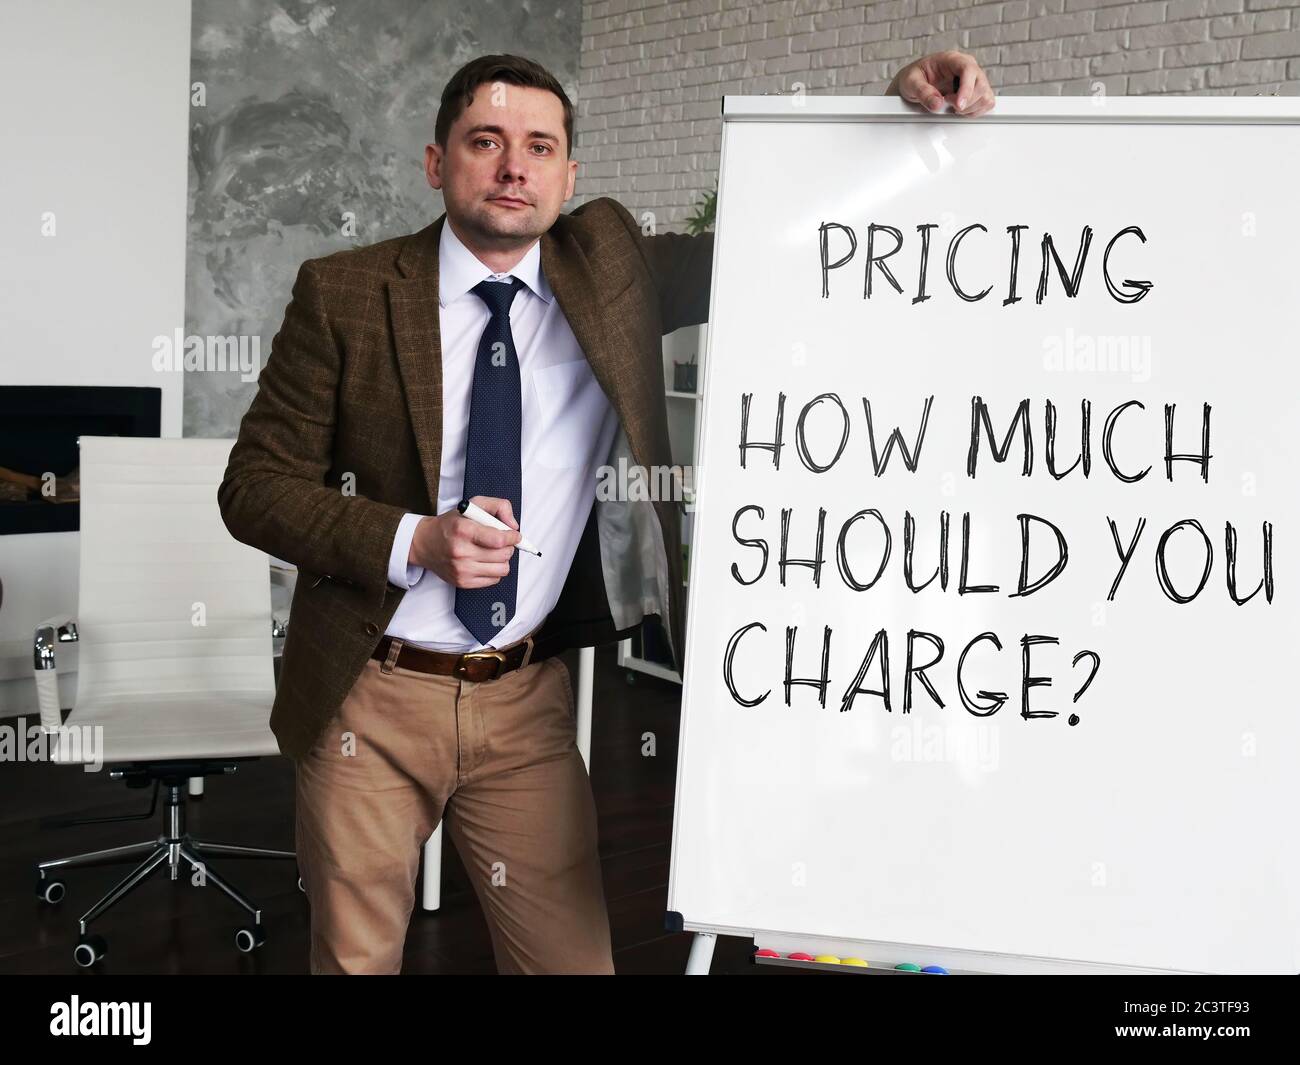 Pricing strategy - How Much Should You Charge. Business Advisor at the blackboard with the inscription. Stock Photo